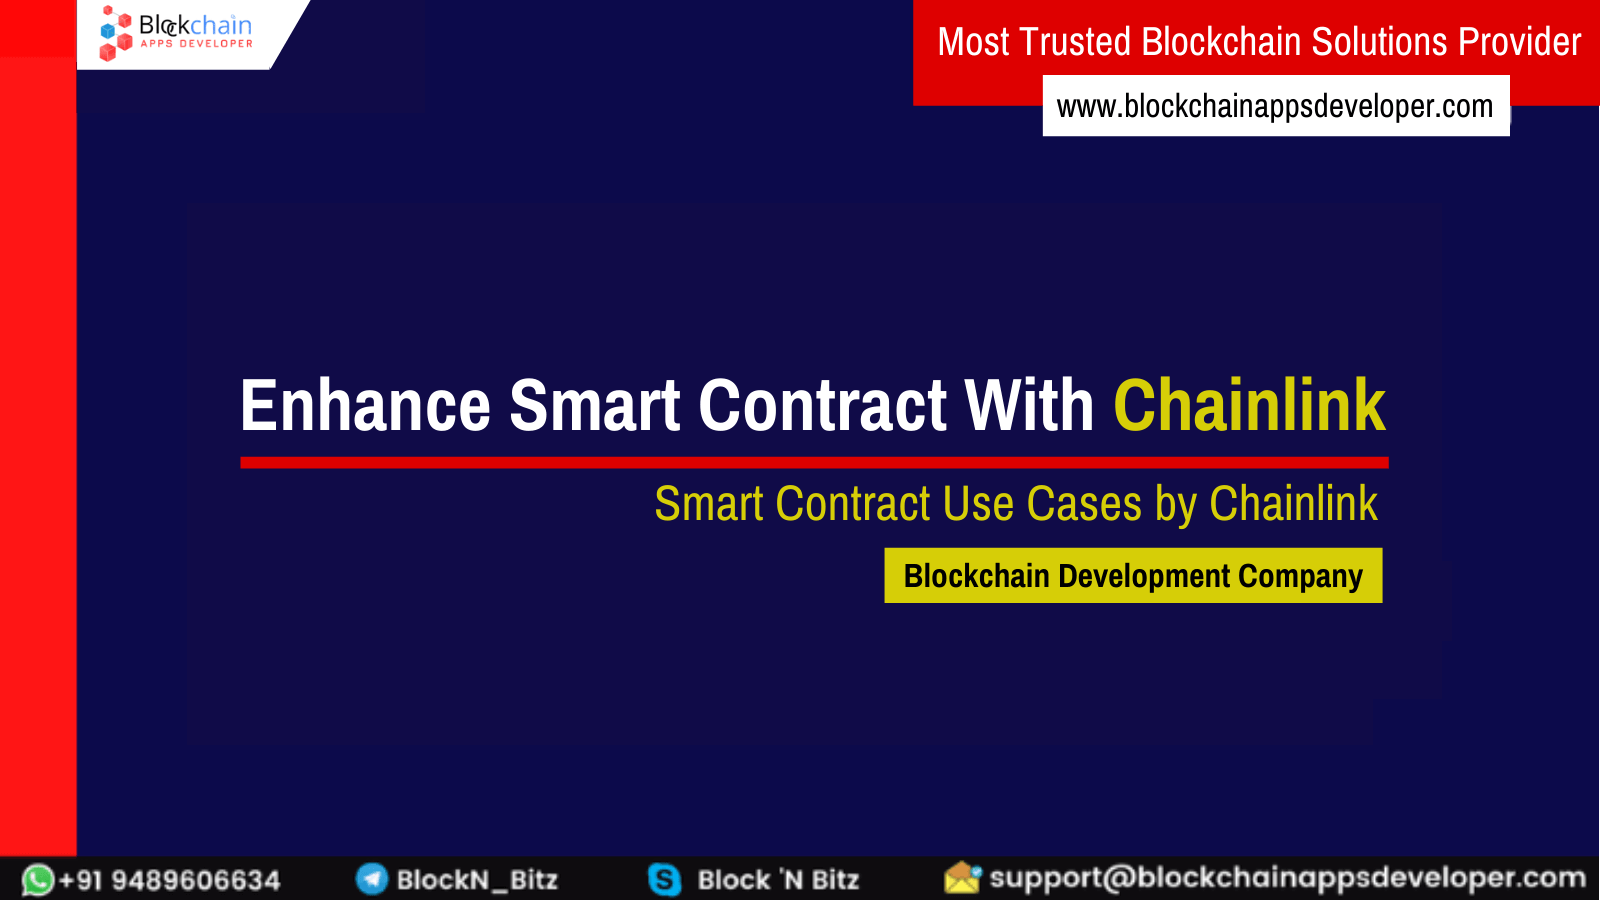 77 Smart Contract Use Cases Enabled By Chainlink - A Complete Guide 2021